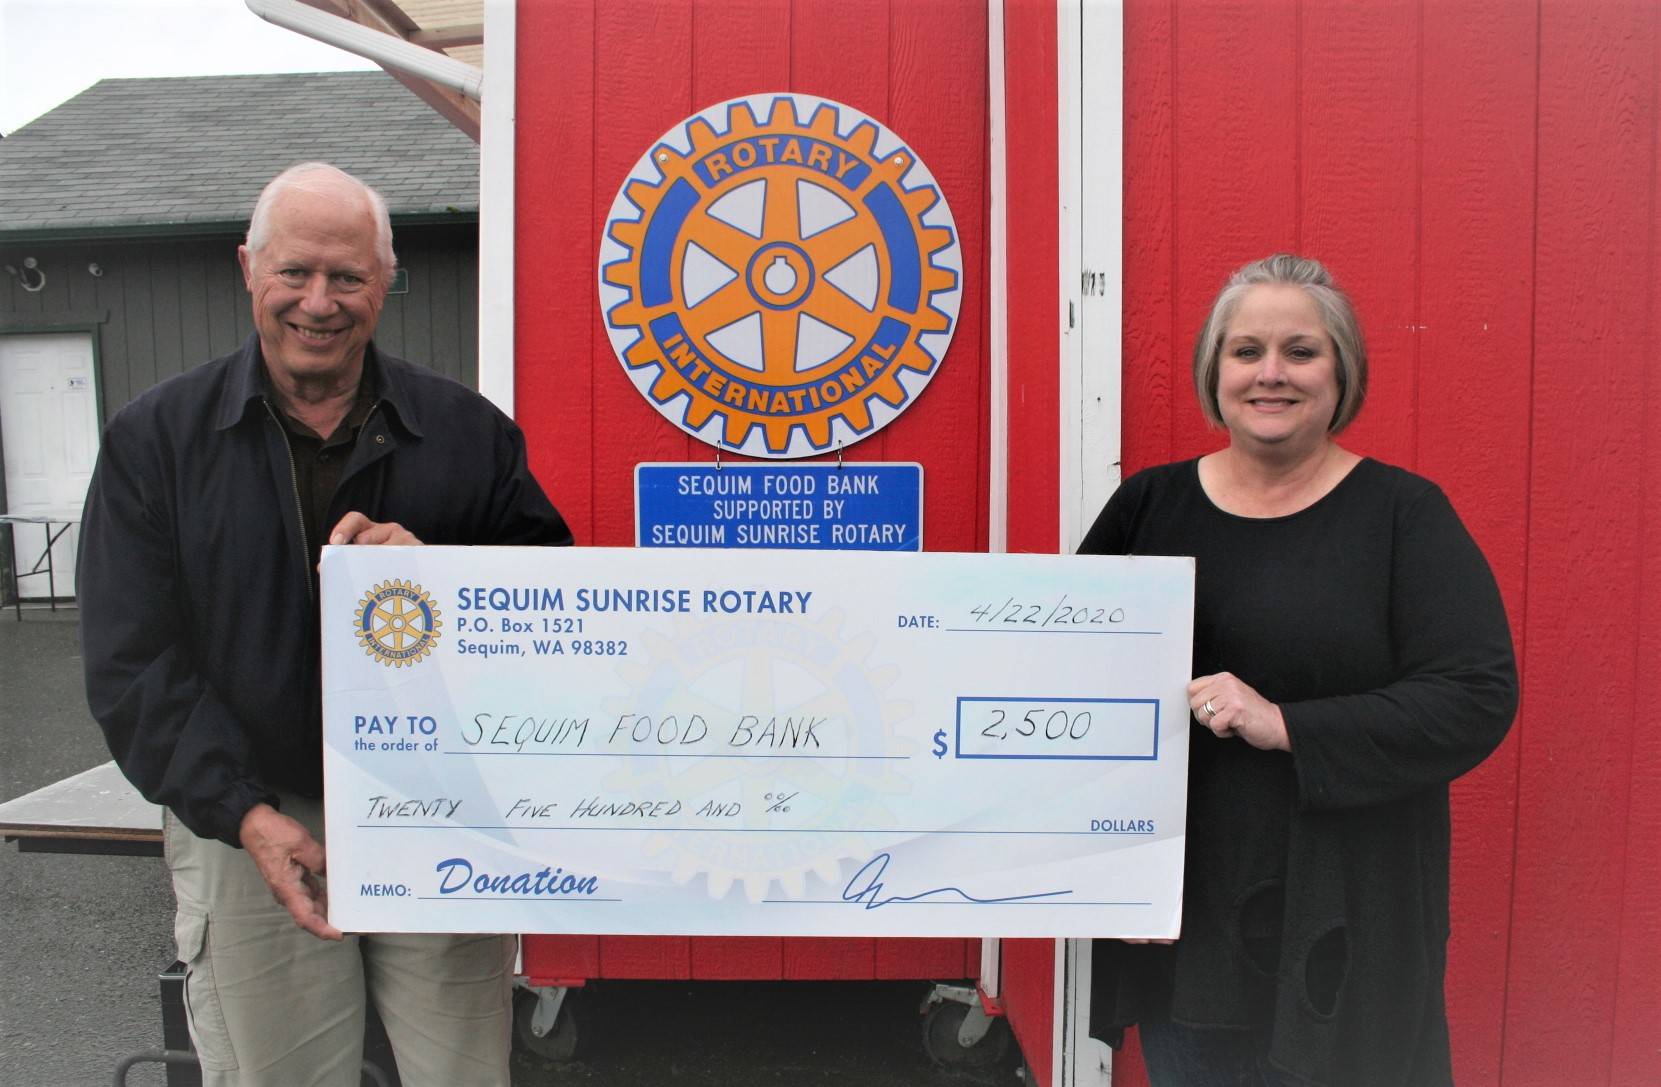 Milestone: Sequim Sunrise Rotary boosts community groups with donations